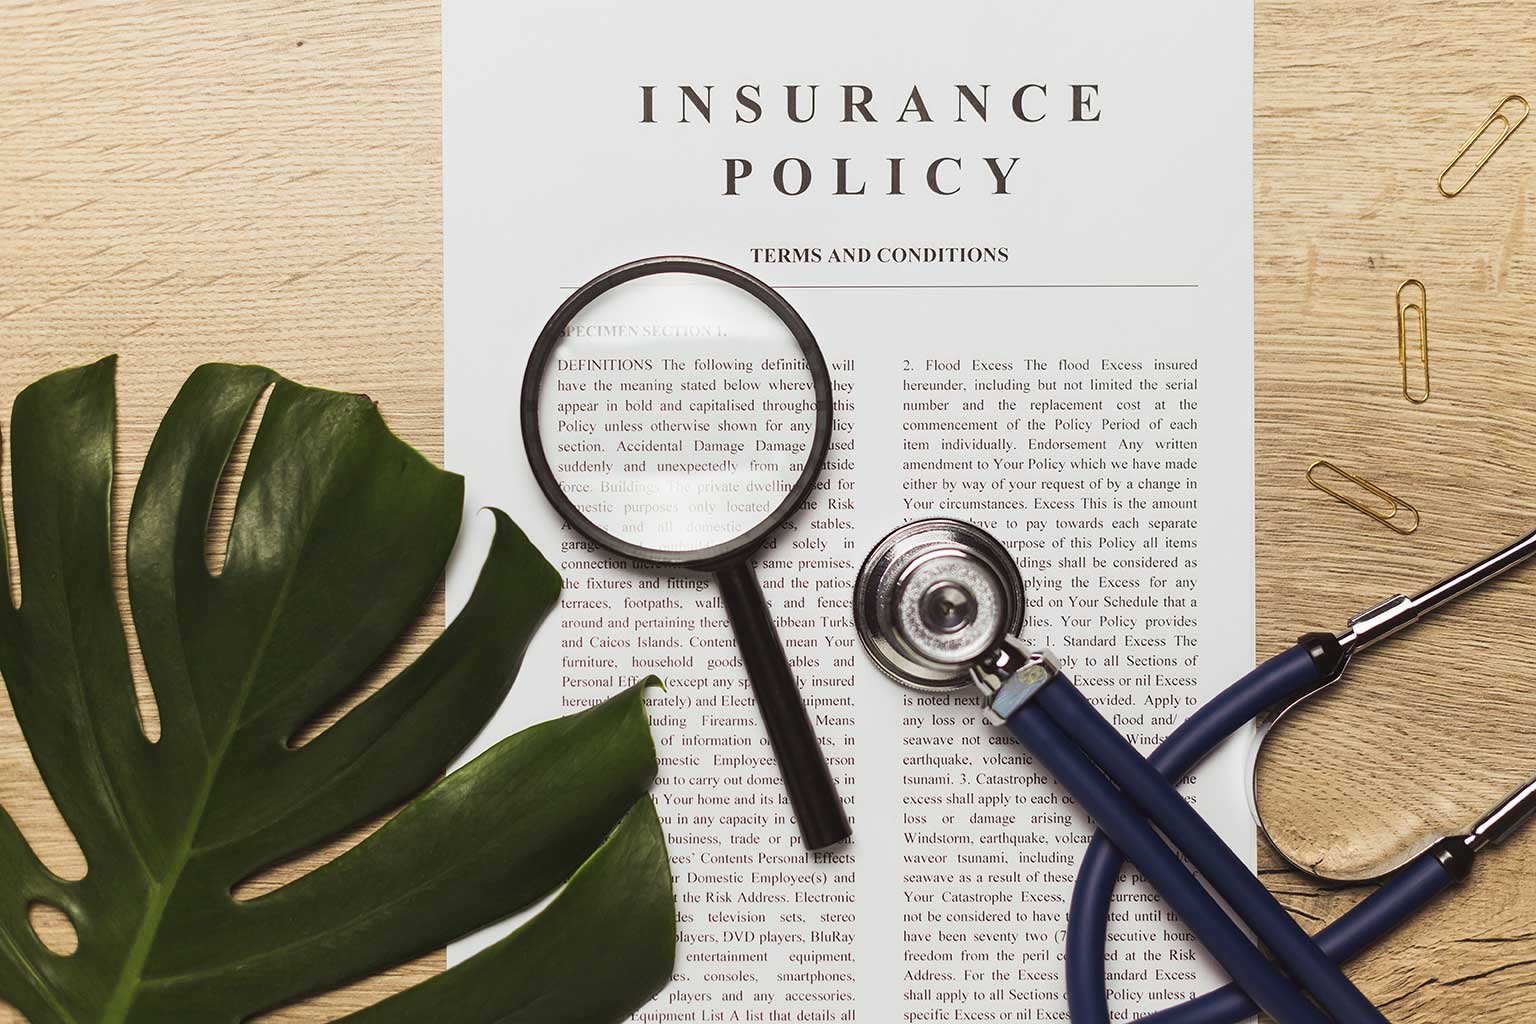 group health insurance policy wording